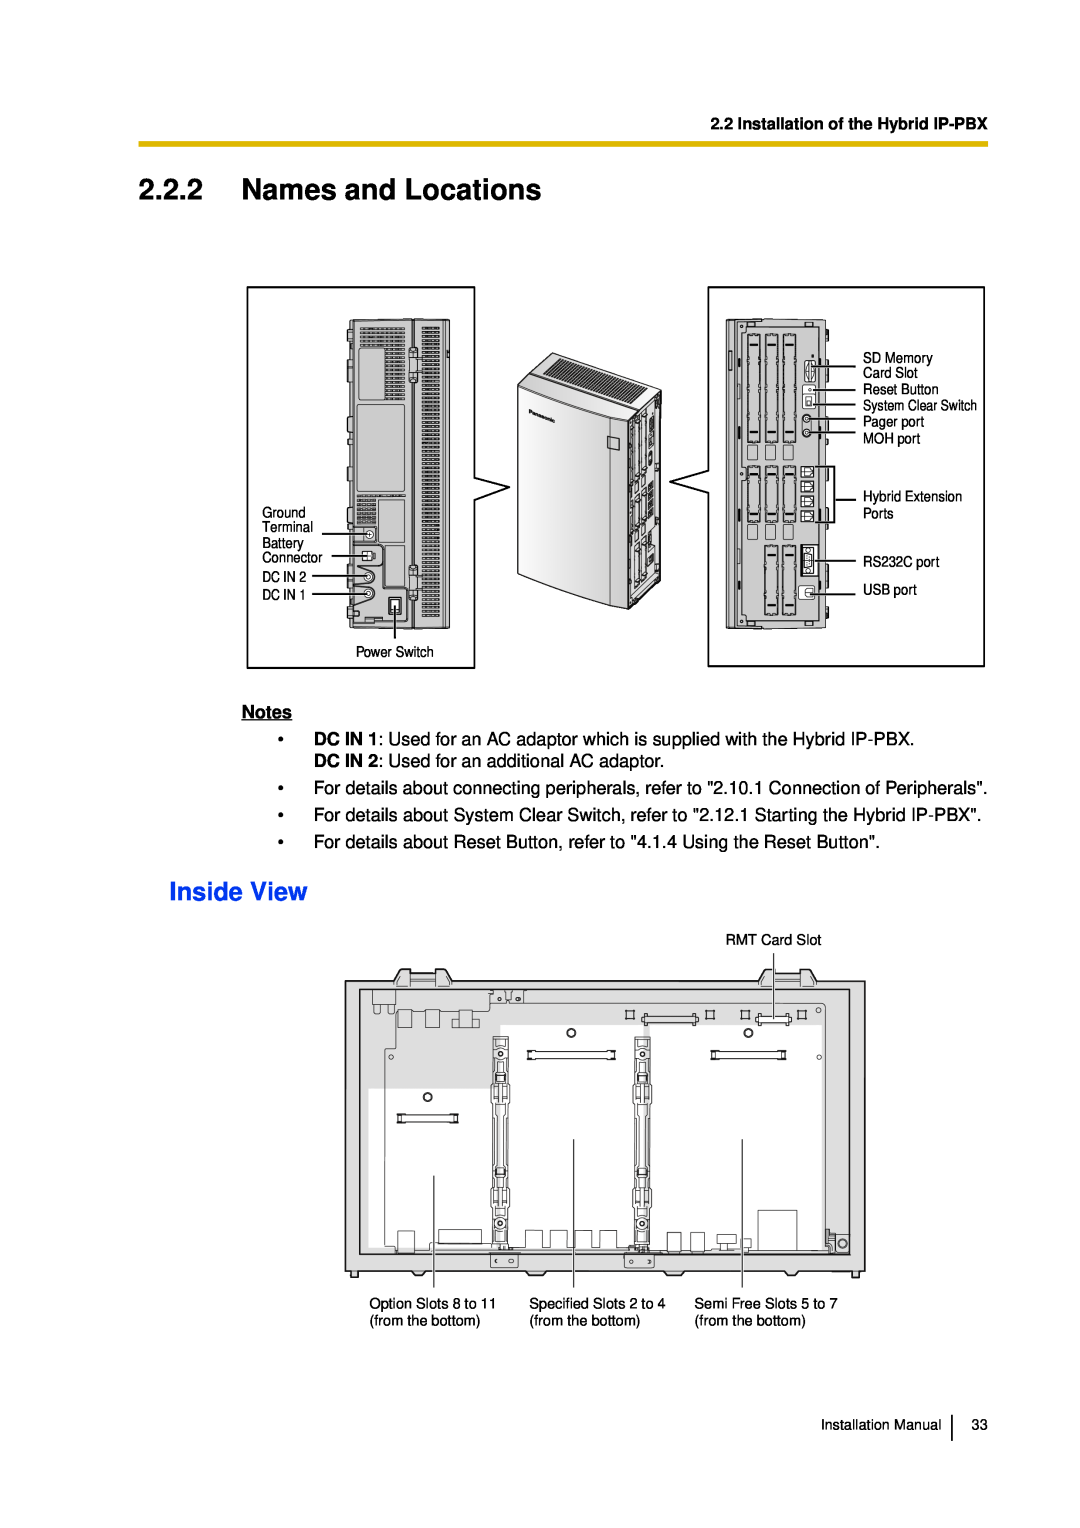 Panasonic KX-TDA30 installation manual 2.2.2Names and Locations, Inside View, Notes 